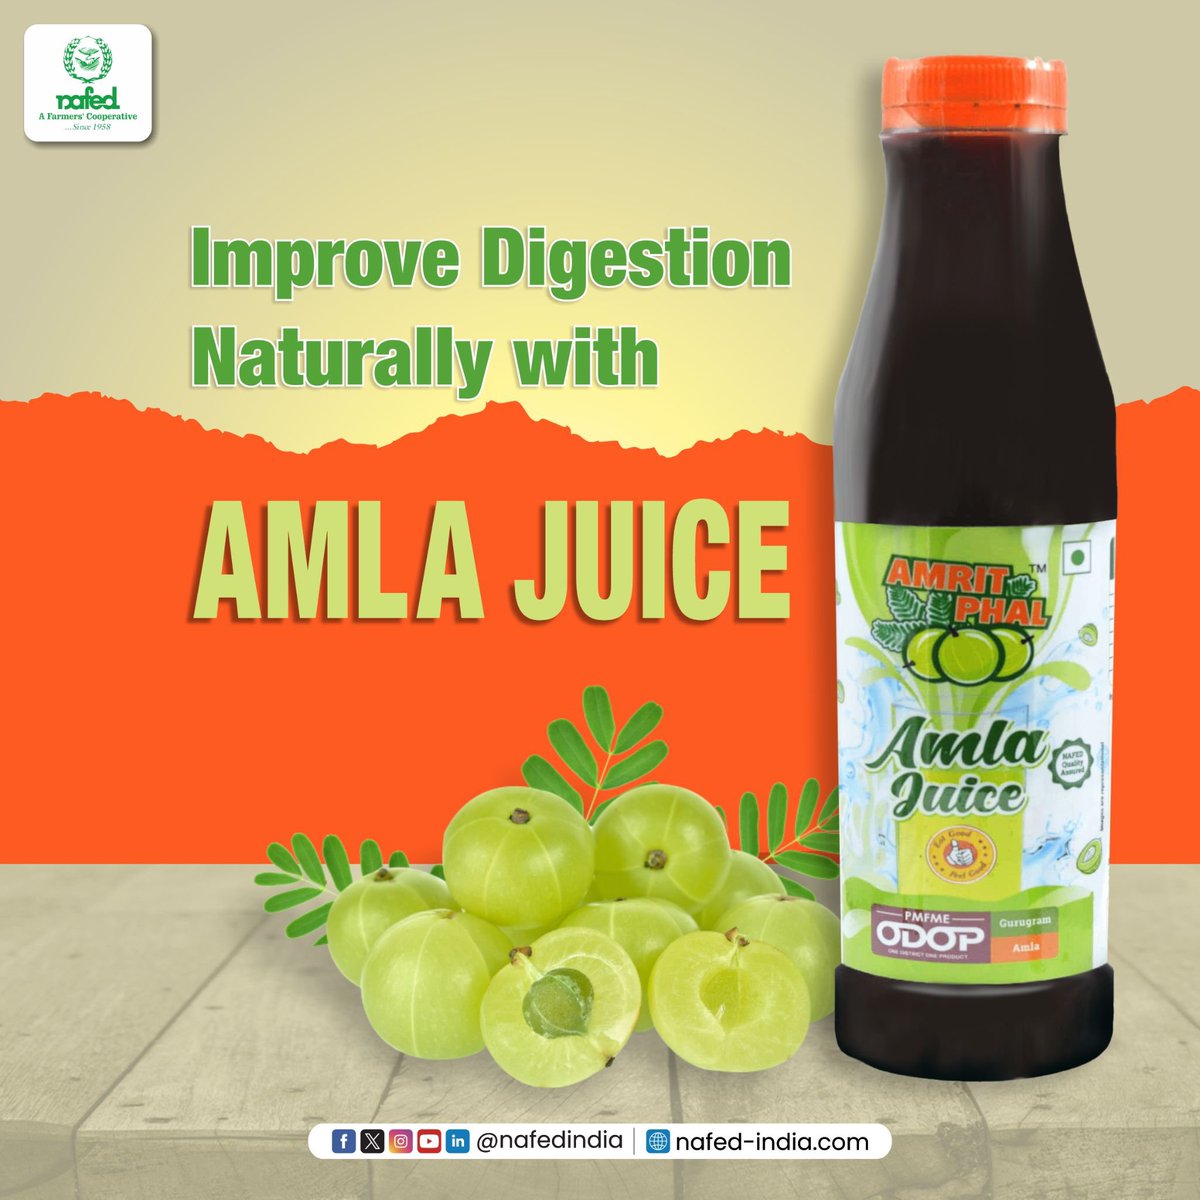 Boost your digestion naturally with Amla Juice! Rich in Vitamin C and antioxidants, Amla is known to aid digestion and promote gut health.

#NAFED #NAFEDIndia #AmlaJuice #NaturalGoodness #HealthyLiving #BoostYourImmunity #StayHealthy #PureandNatural